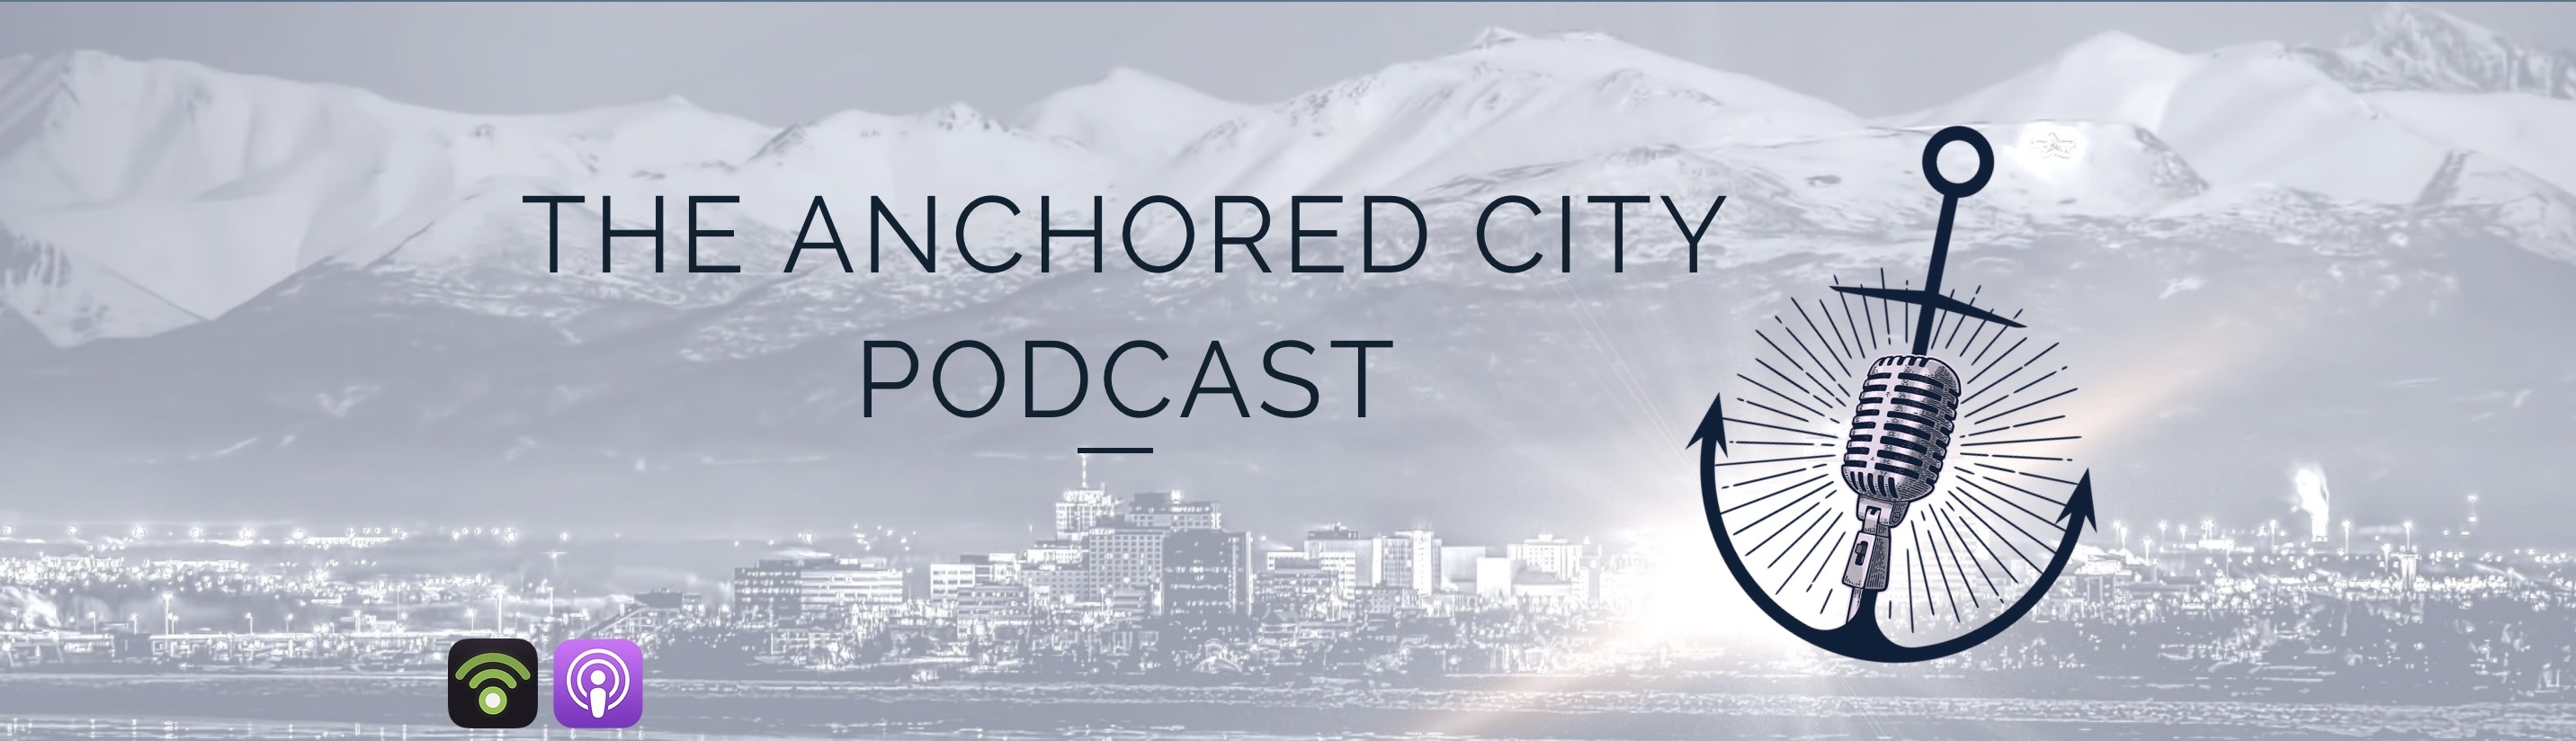 The AnchorED City